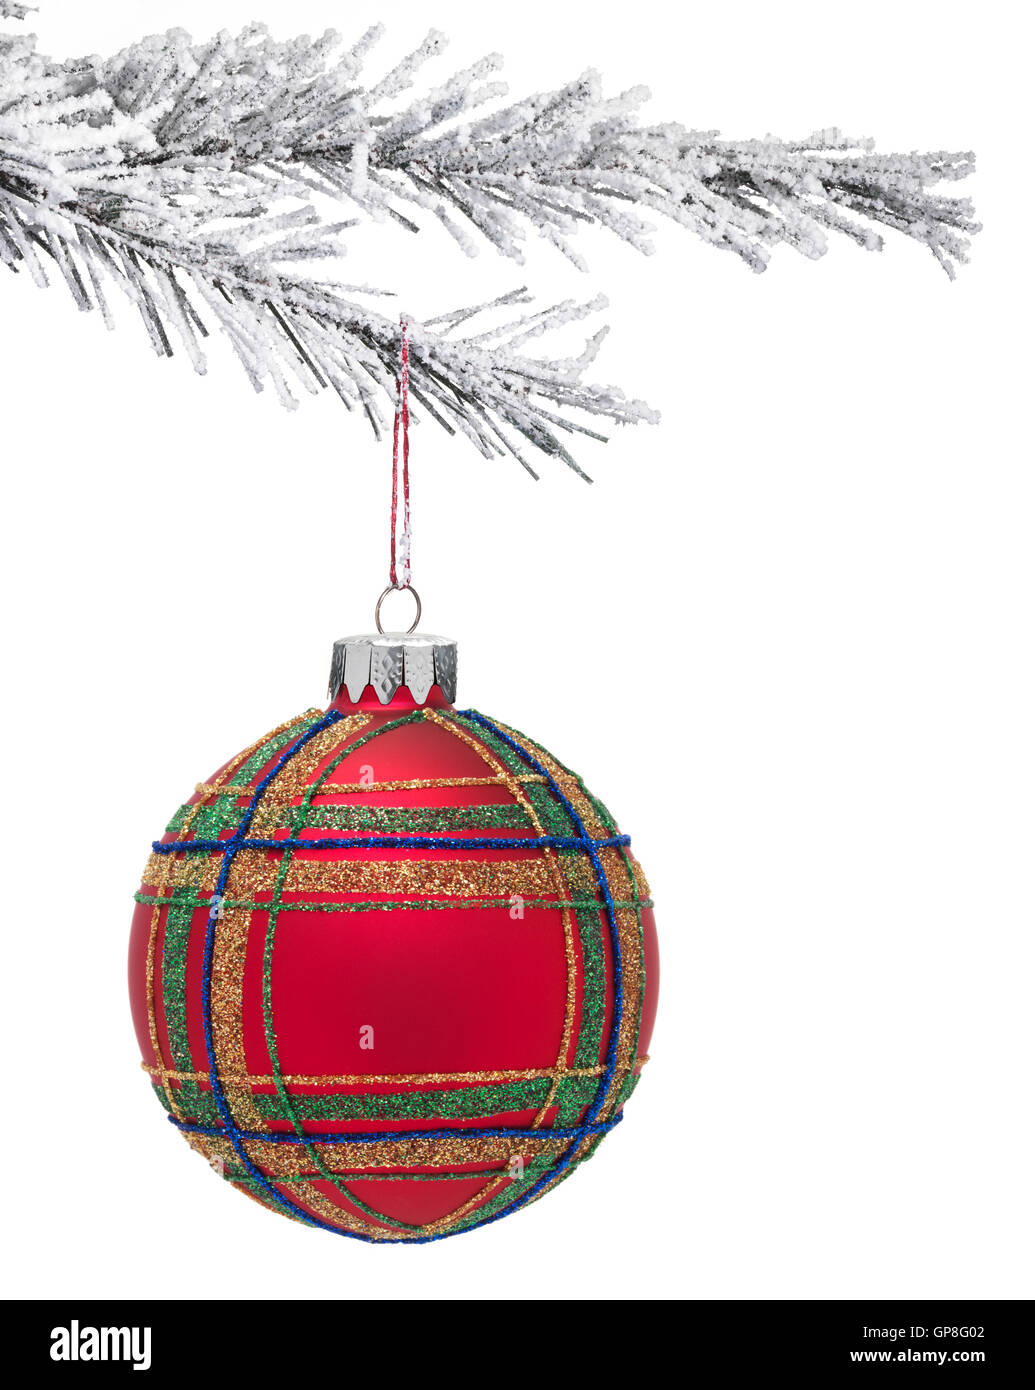 Snow covered Christmas tree with a red Bauble hanging on a white background Stock Photo